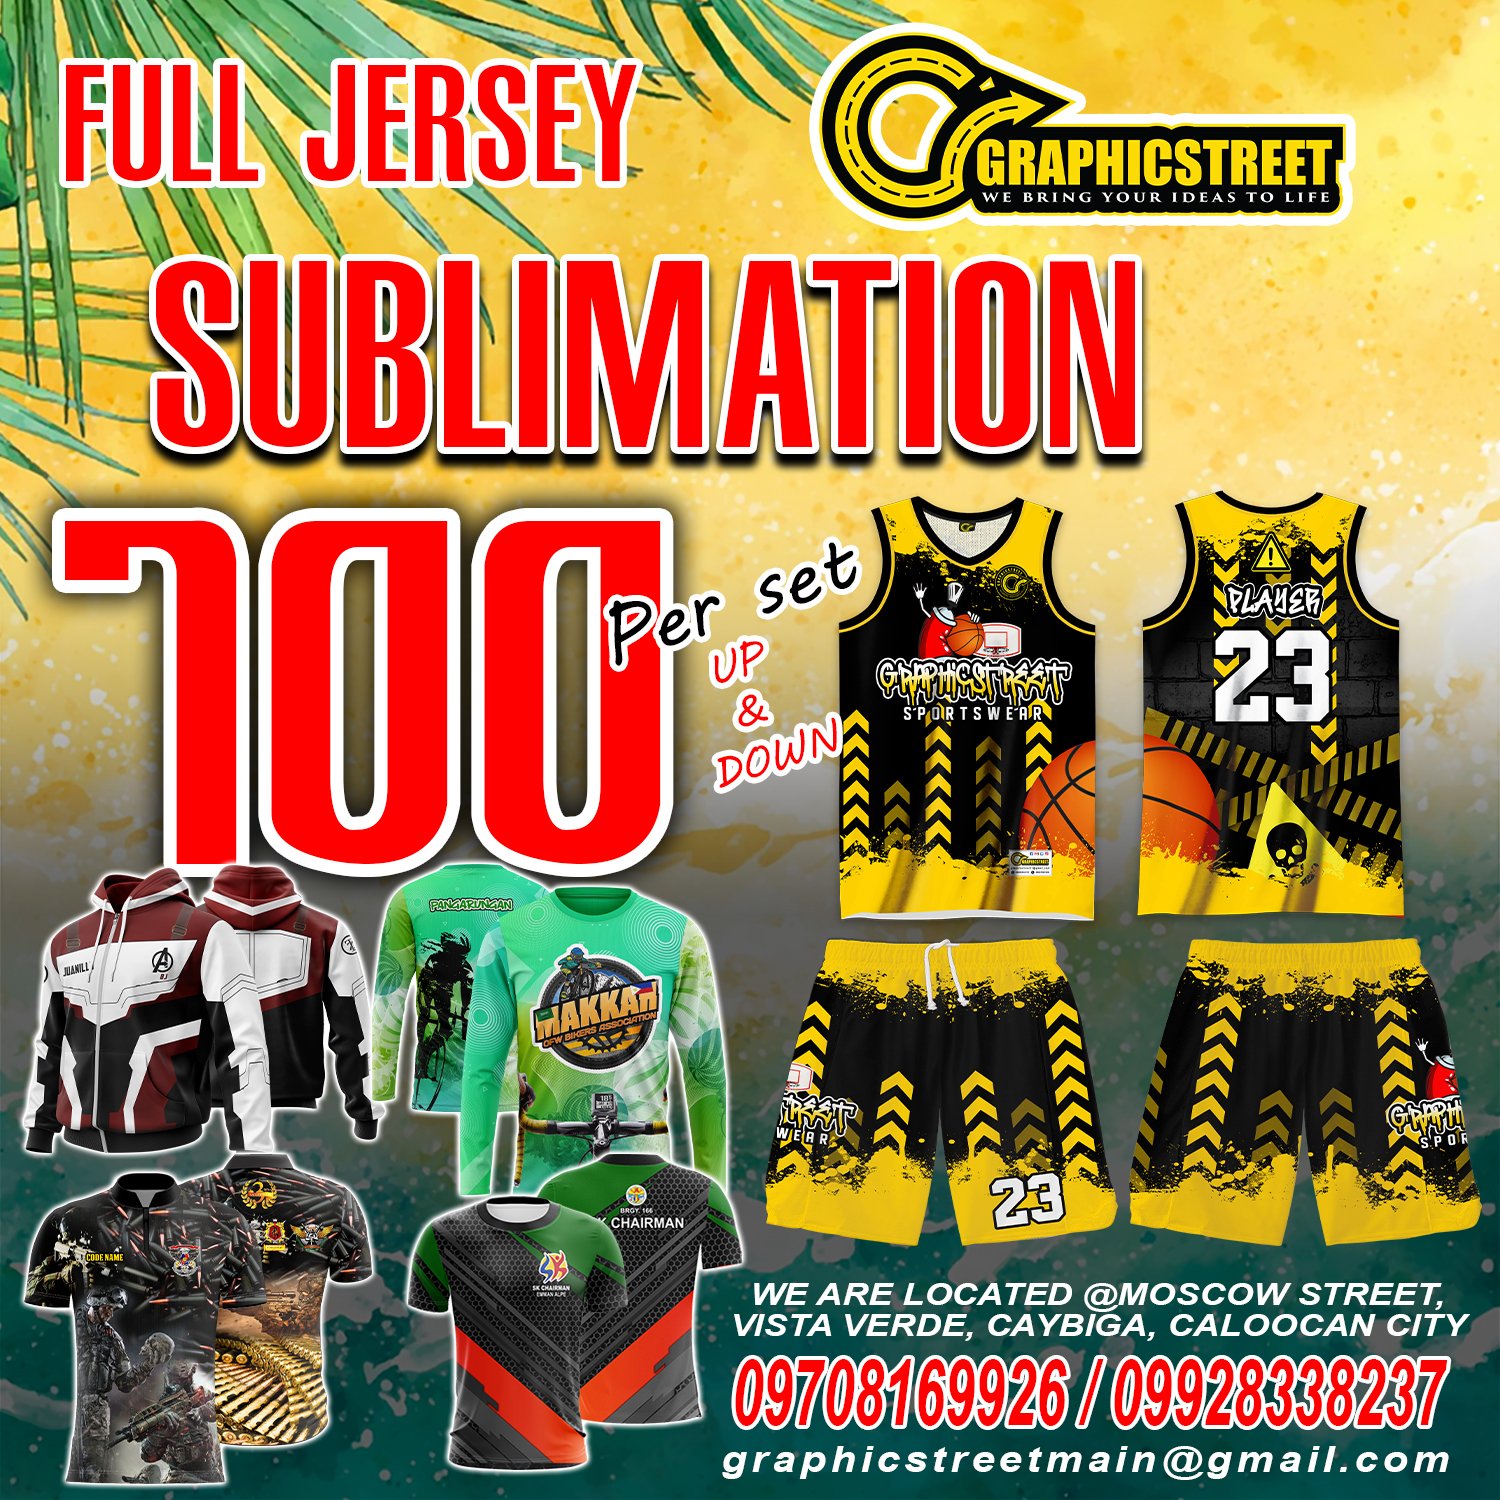 cheapest jersey sublimation